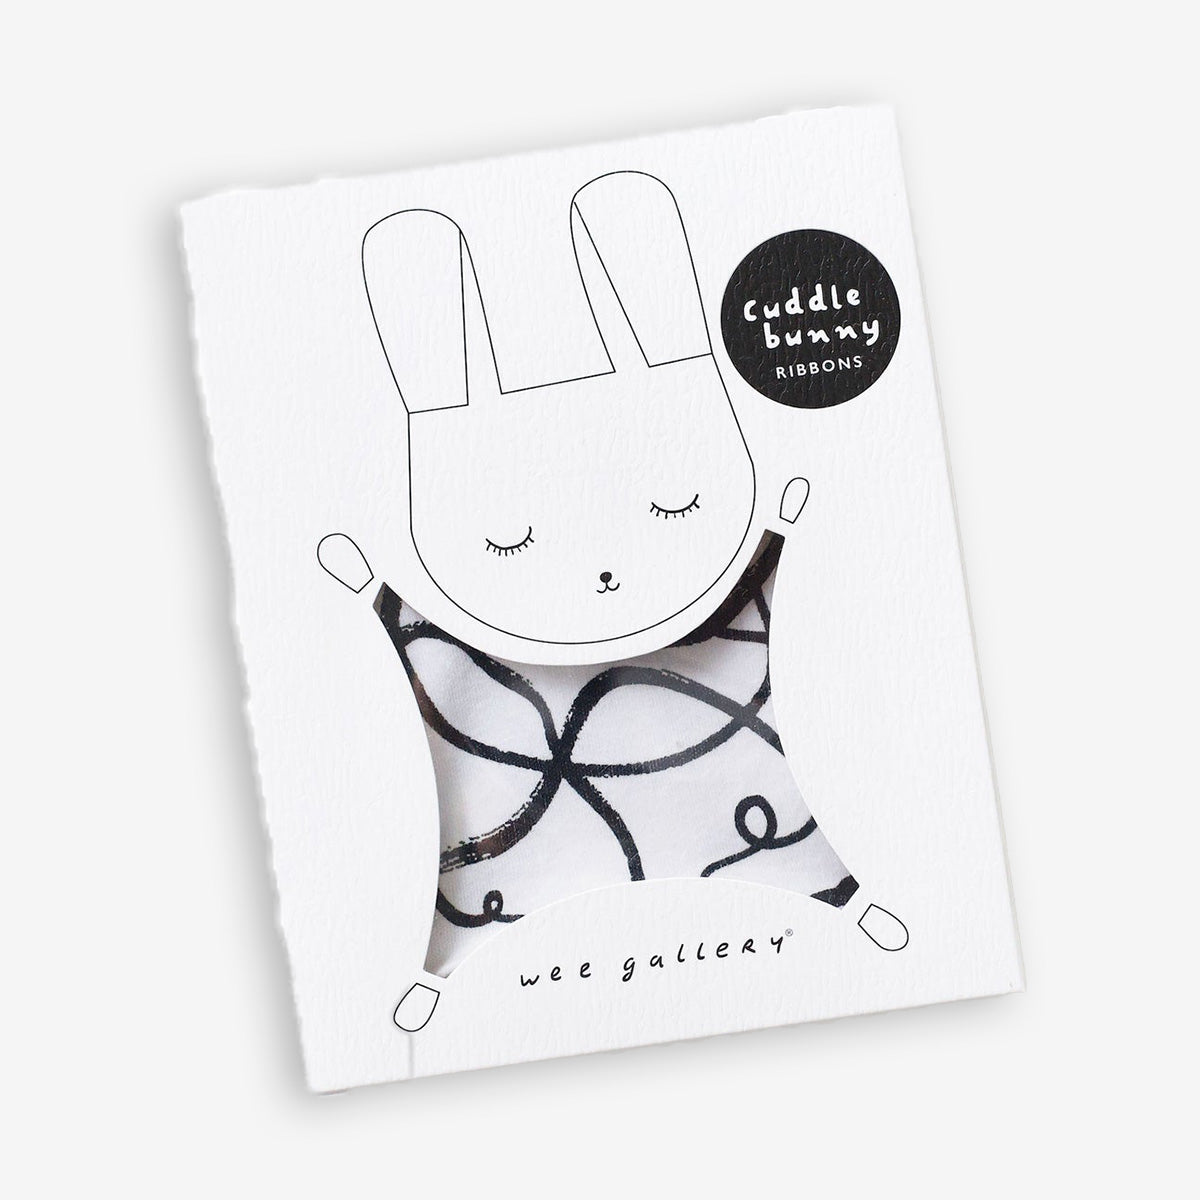 Wee Gallery Cuddle Bunny - Ribbons